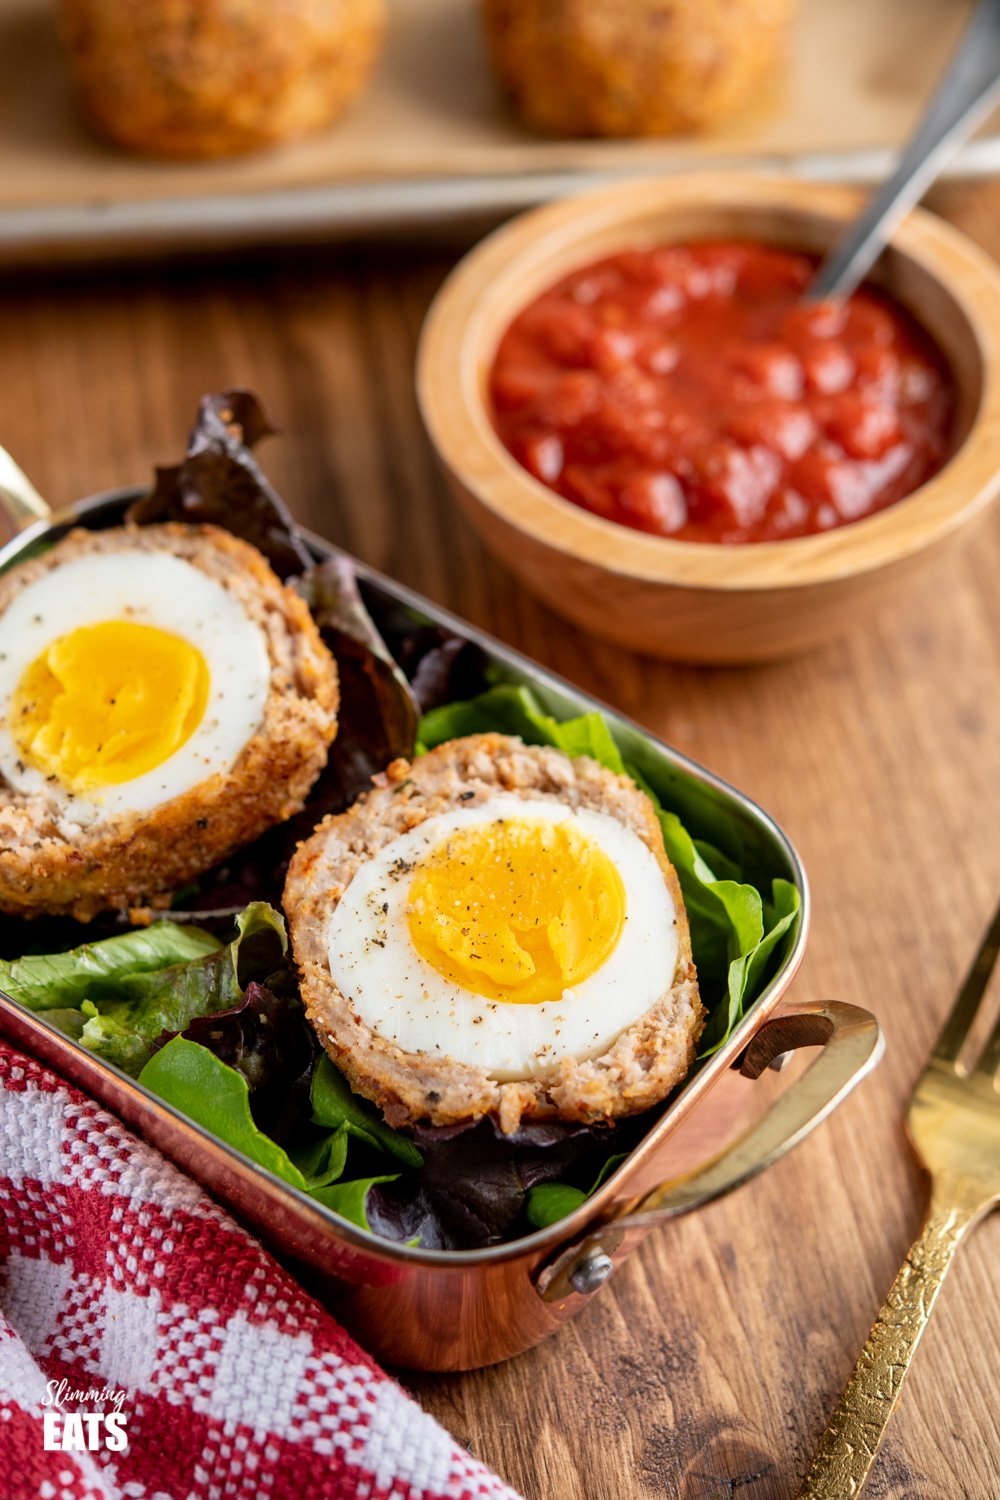 Oven Baked Scotch Egg in a small metal tray lined with baby salad leaves served with relish